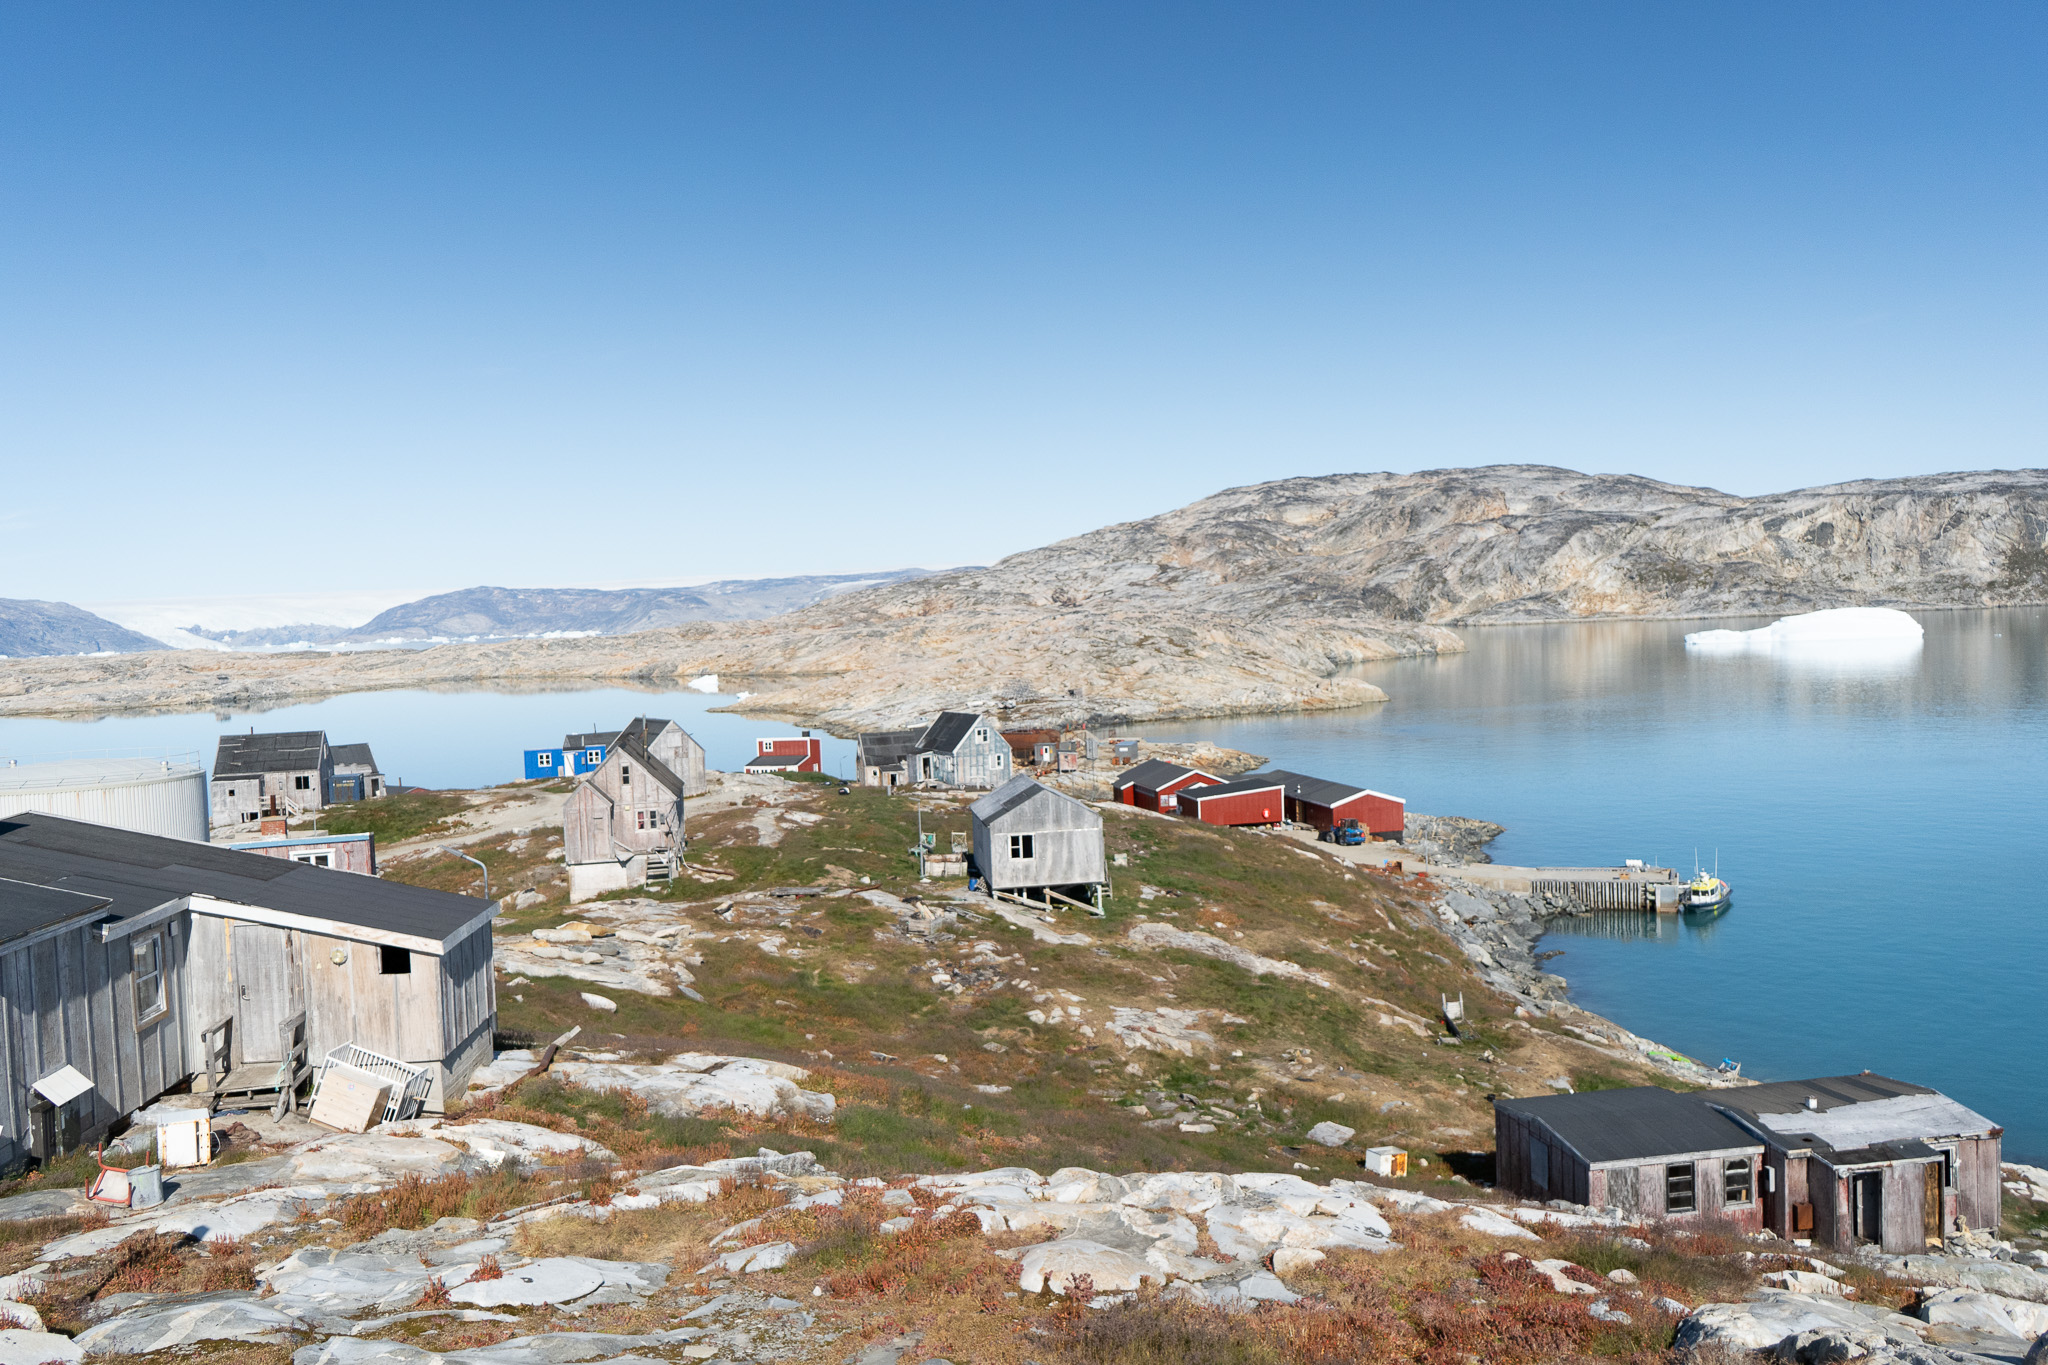 Isertoq - the smallest settlement in the Ammassalik area. Photo by Visit East Greenland